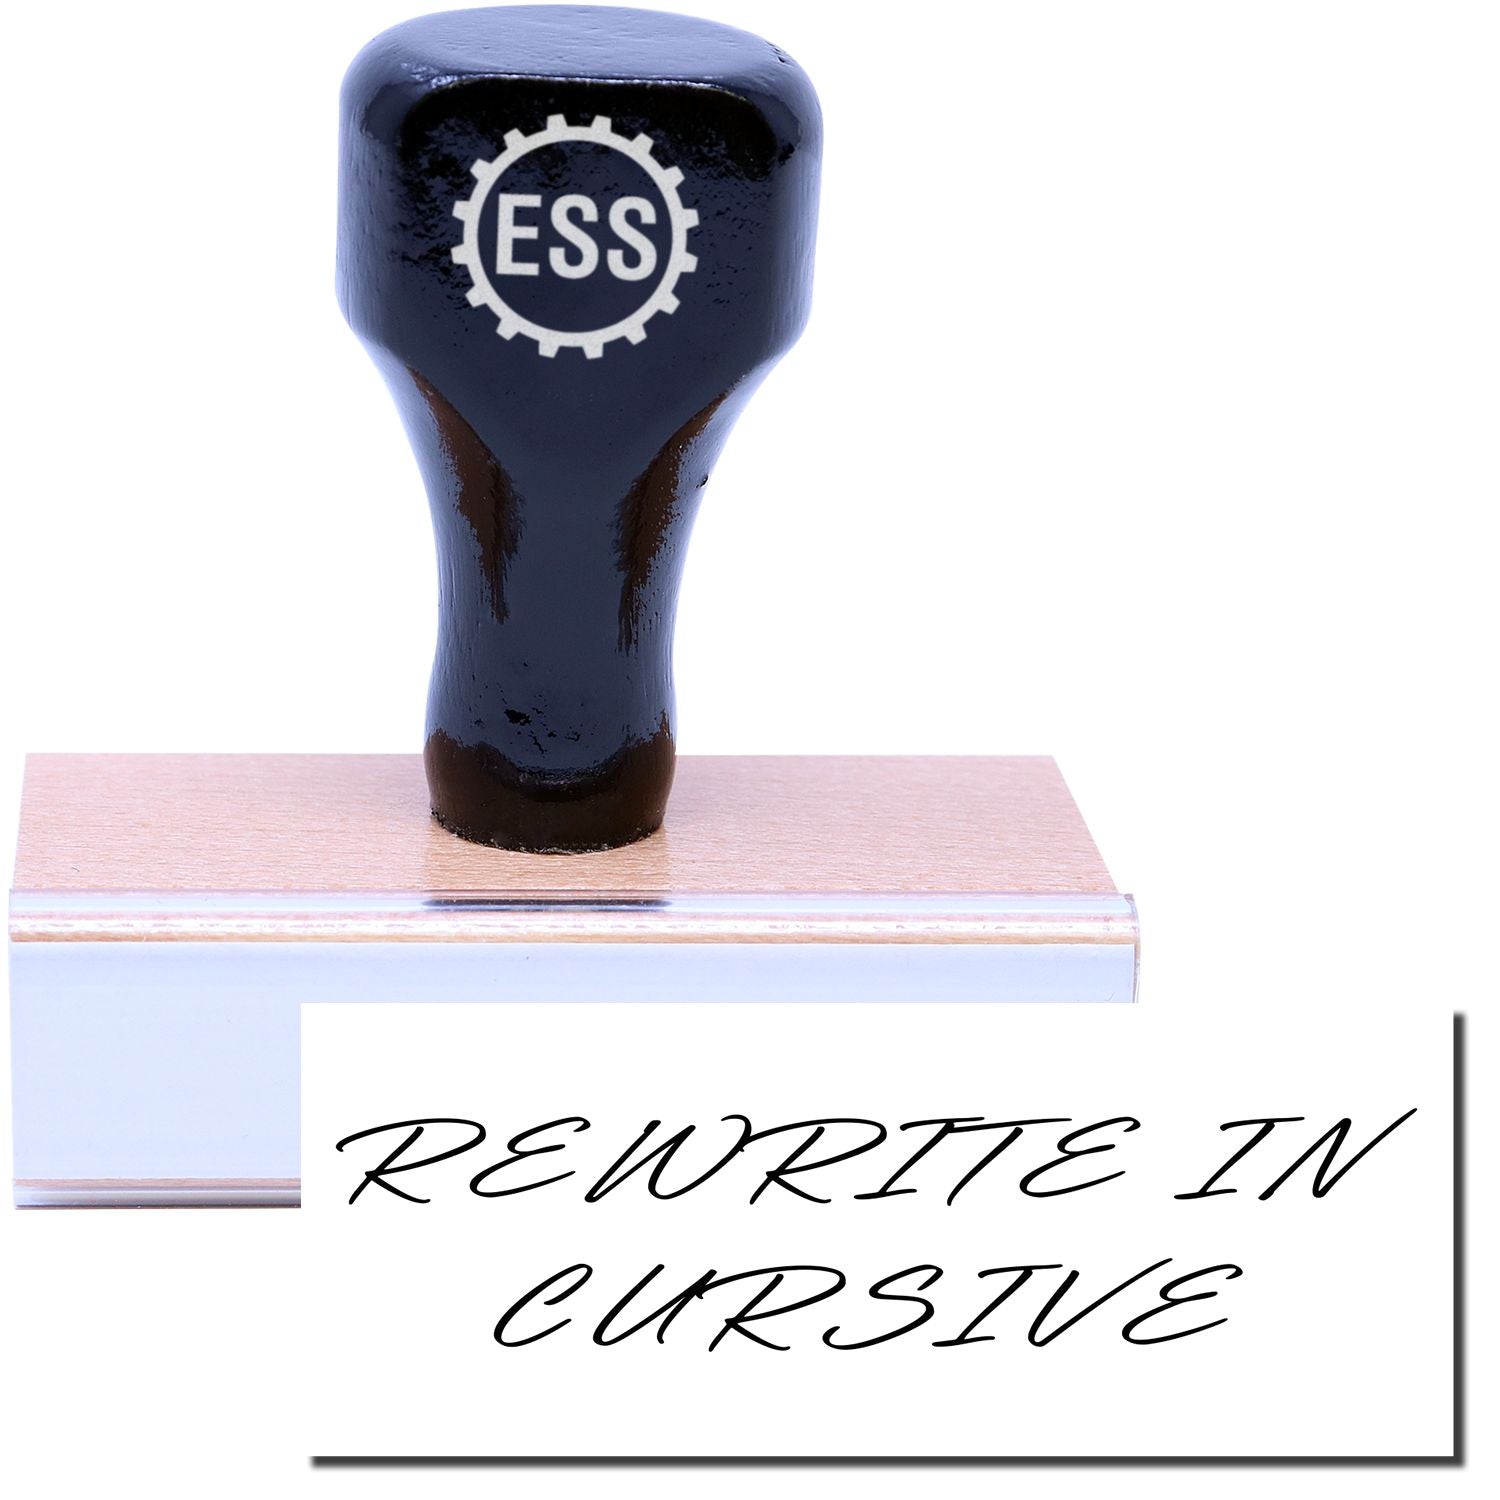 A stock office rubber stamp with a stamped image showing how the text "REWRITE IN CURSIVE" in a large cursive font is displayed after stamping.